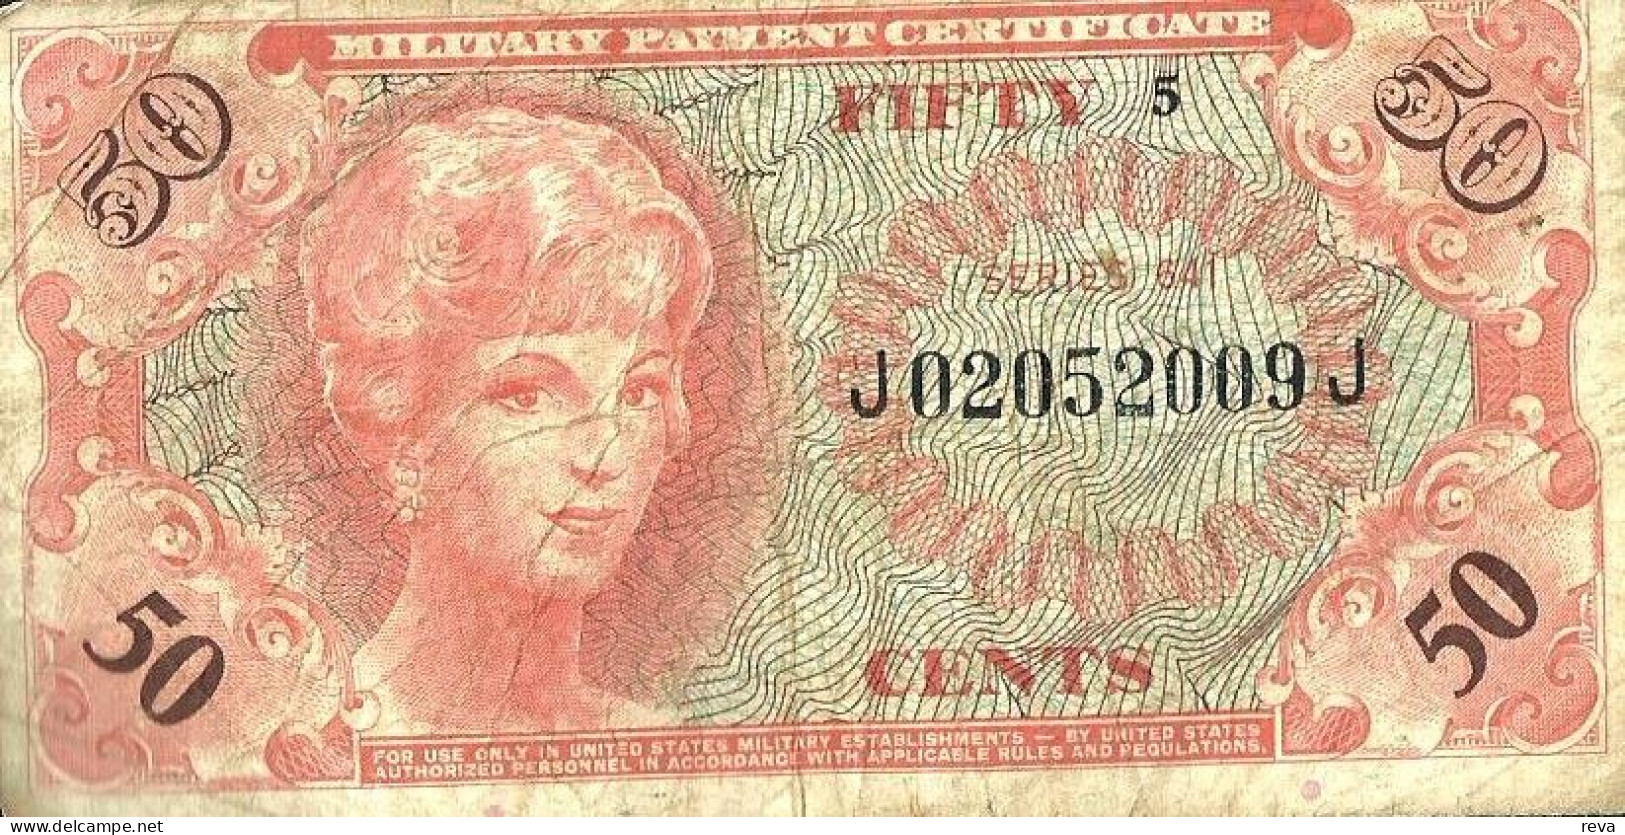 USA UNITED STATES 50 CENTS MILITARY CERTIFICATE RED WOMAN SERIES 641 VF ND(1965-68) PM60a READ DESCRIPTION CAREFULLY !! - 1965-1968 - Series 641